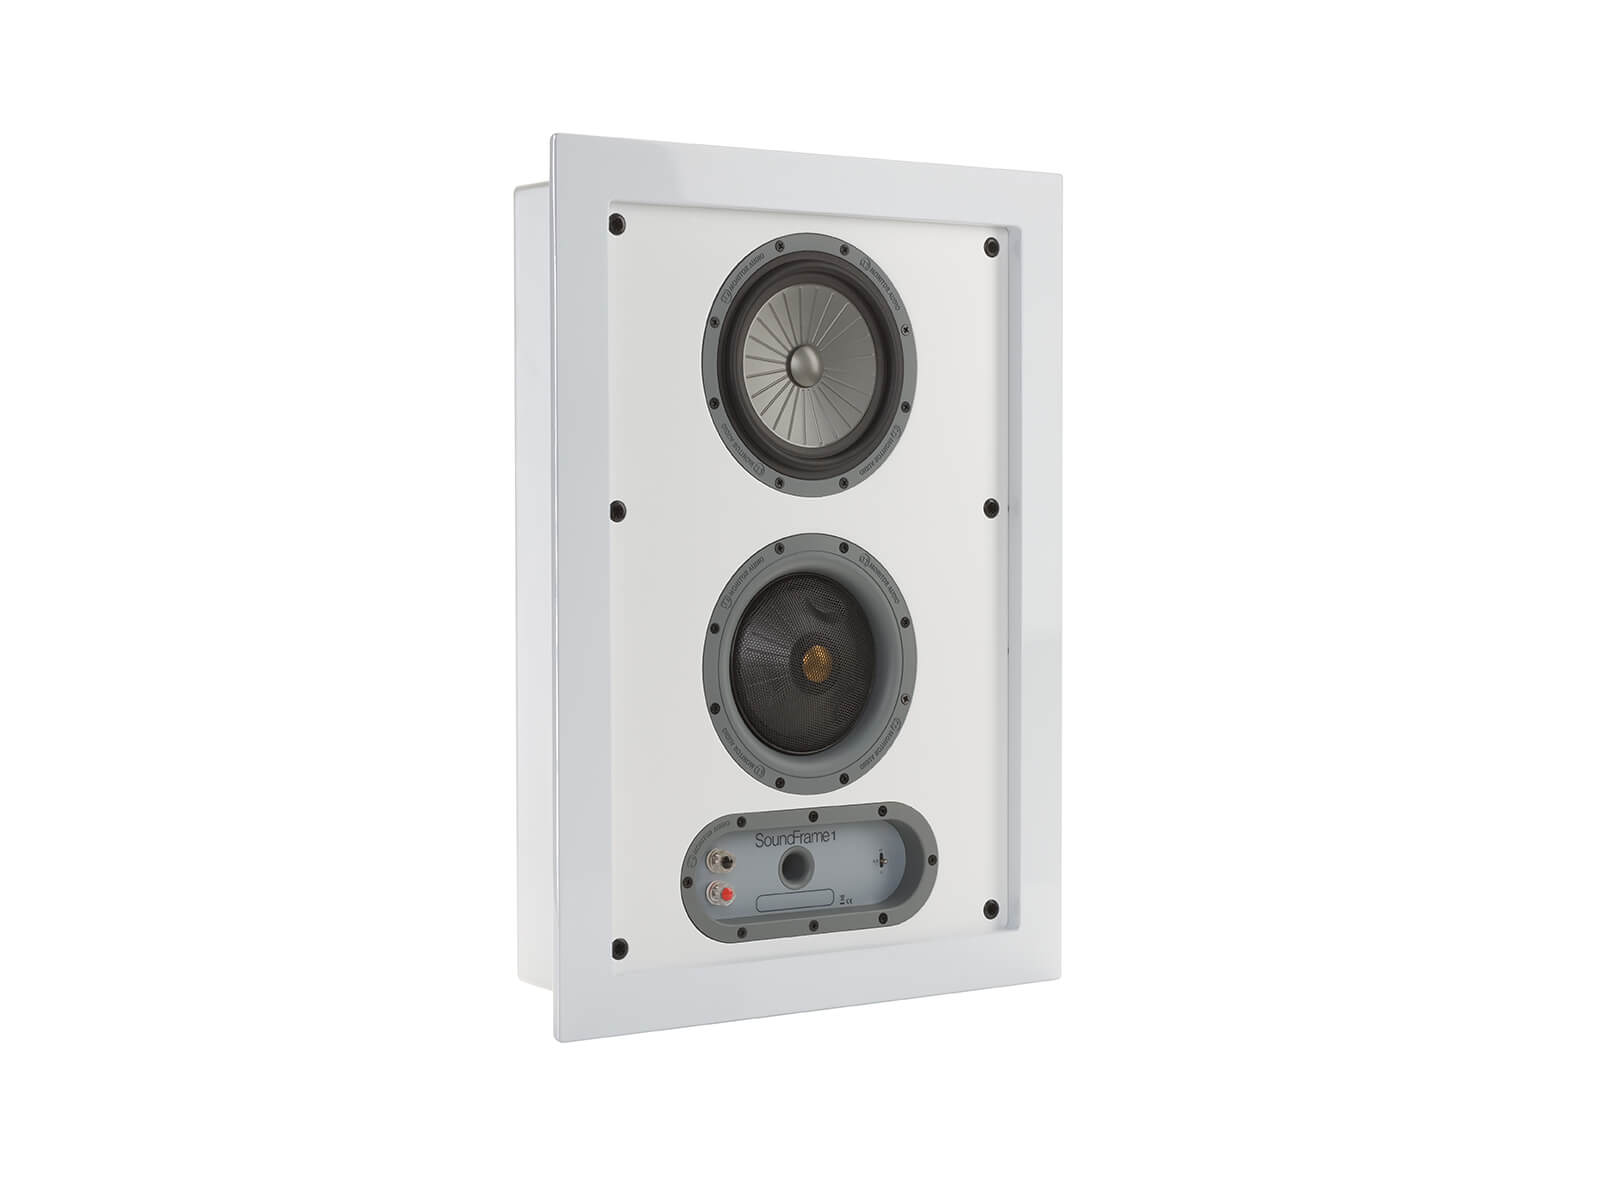 SoundFrame SF1, on-wall speakers, grille-less, with a high gloss white lacquer finish.